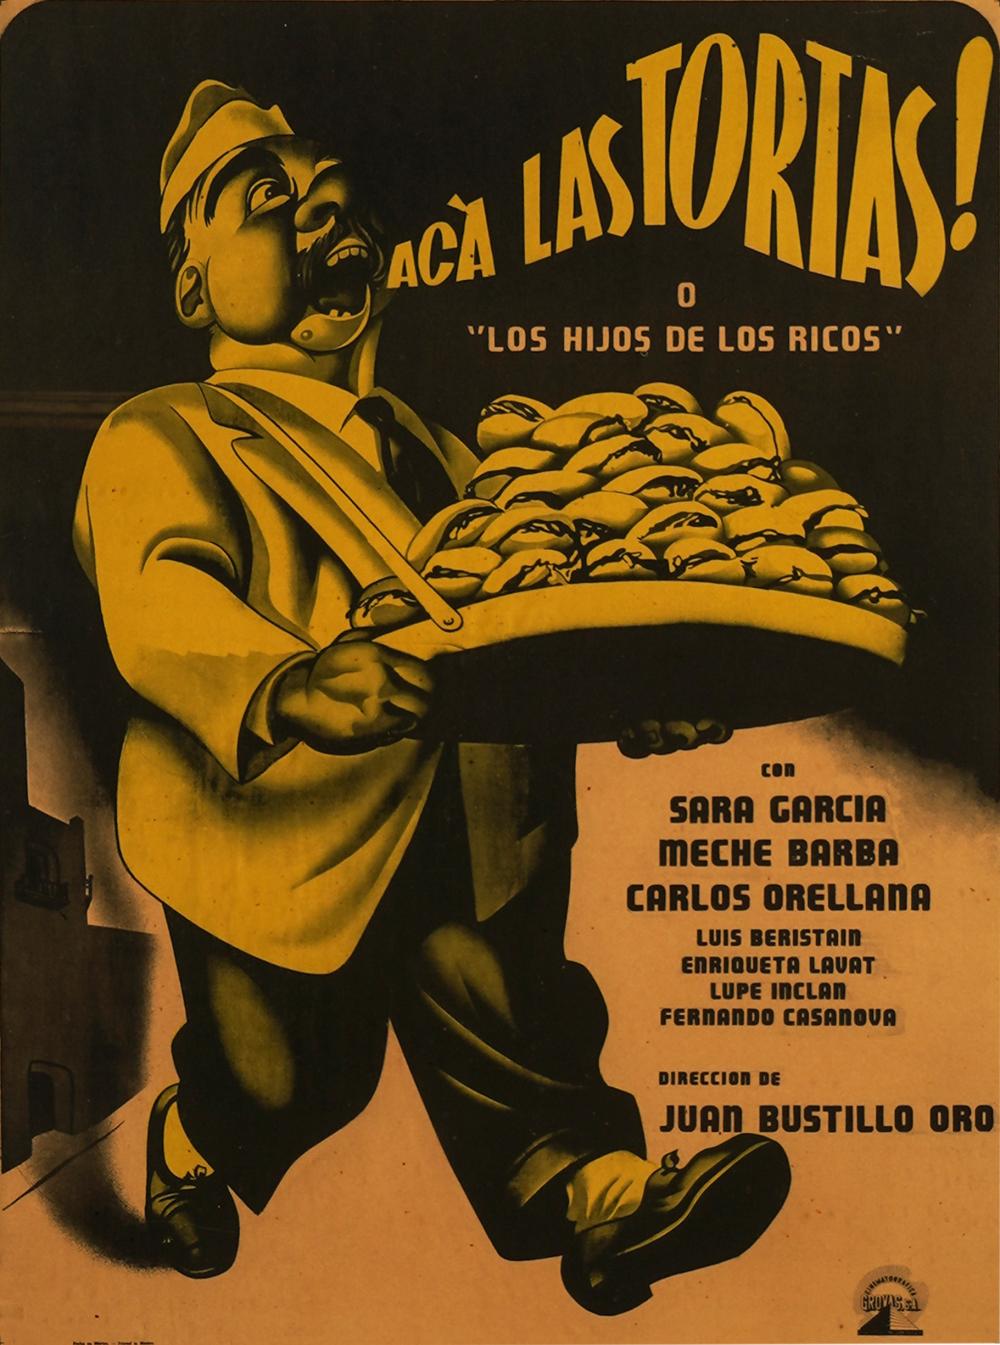 MEXICAN MOVIE POSTER REPRODUCTION 32753b